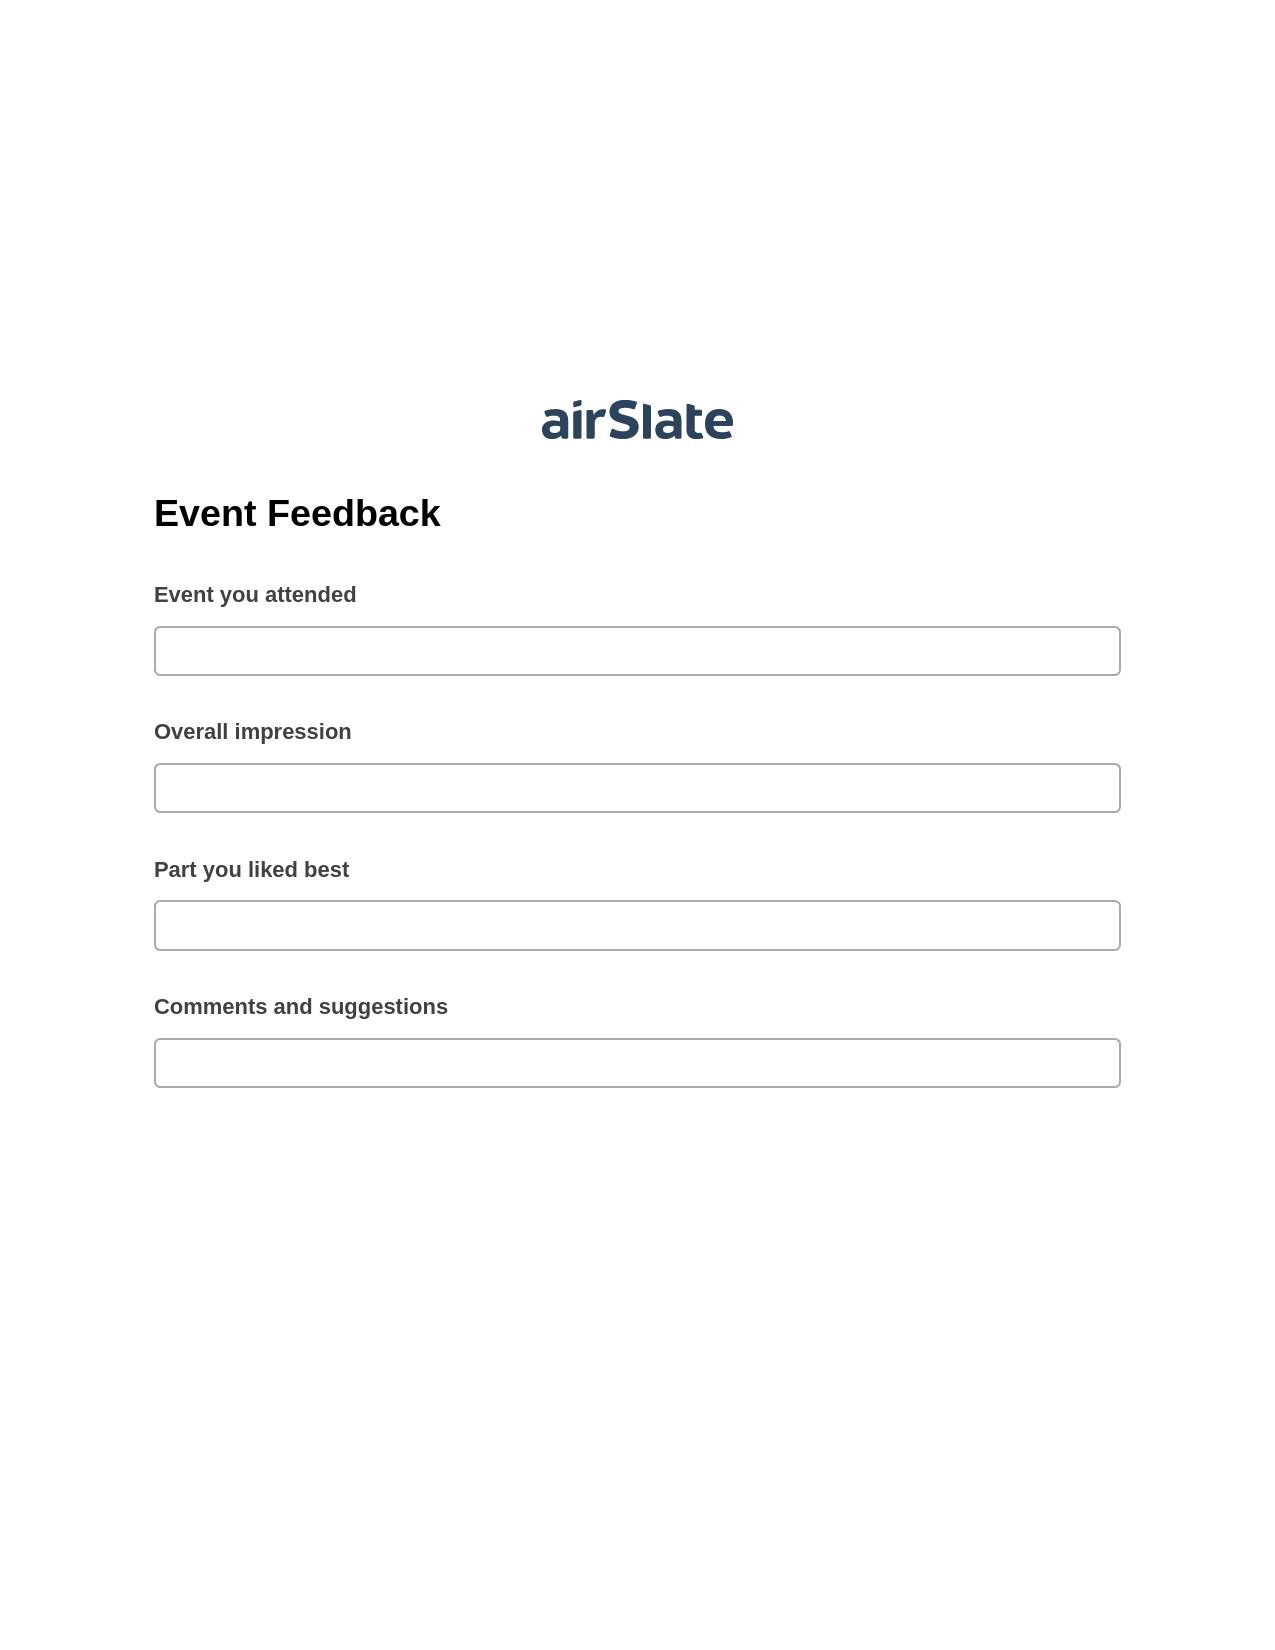 Multirole Event Feedback Pre-fill from Salesforce Record Bot, Mailchimp add recipient to audience Bot, Export to Excel 365 Bot